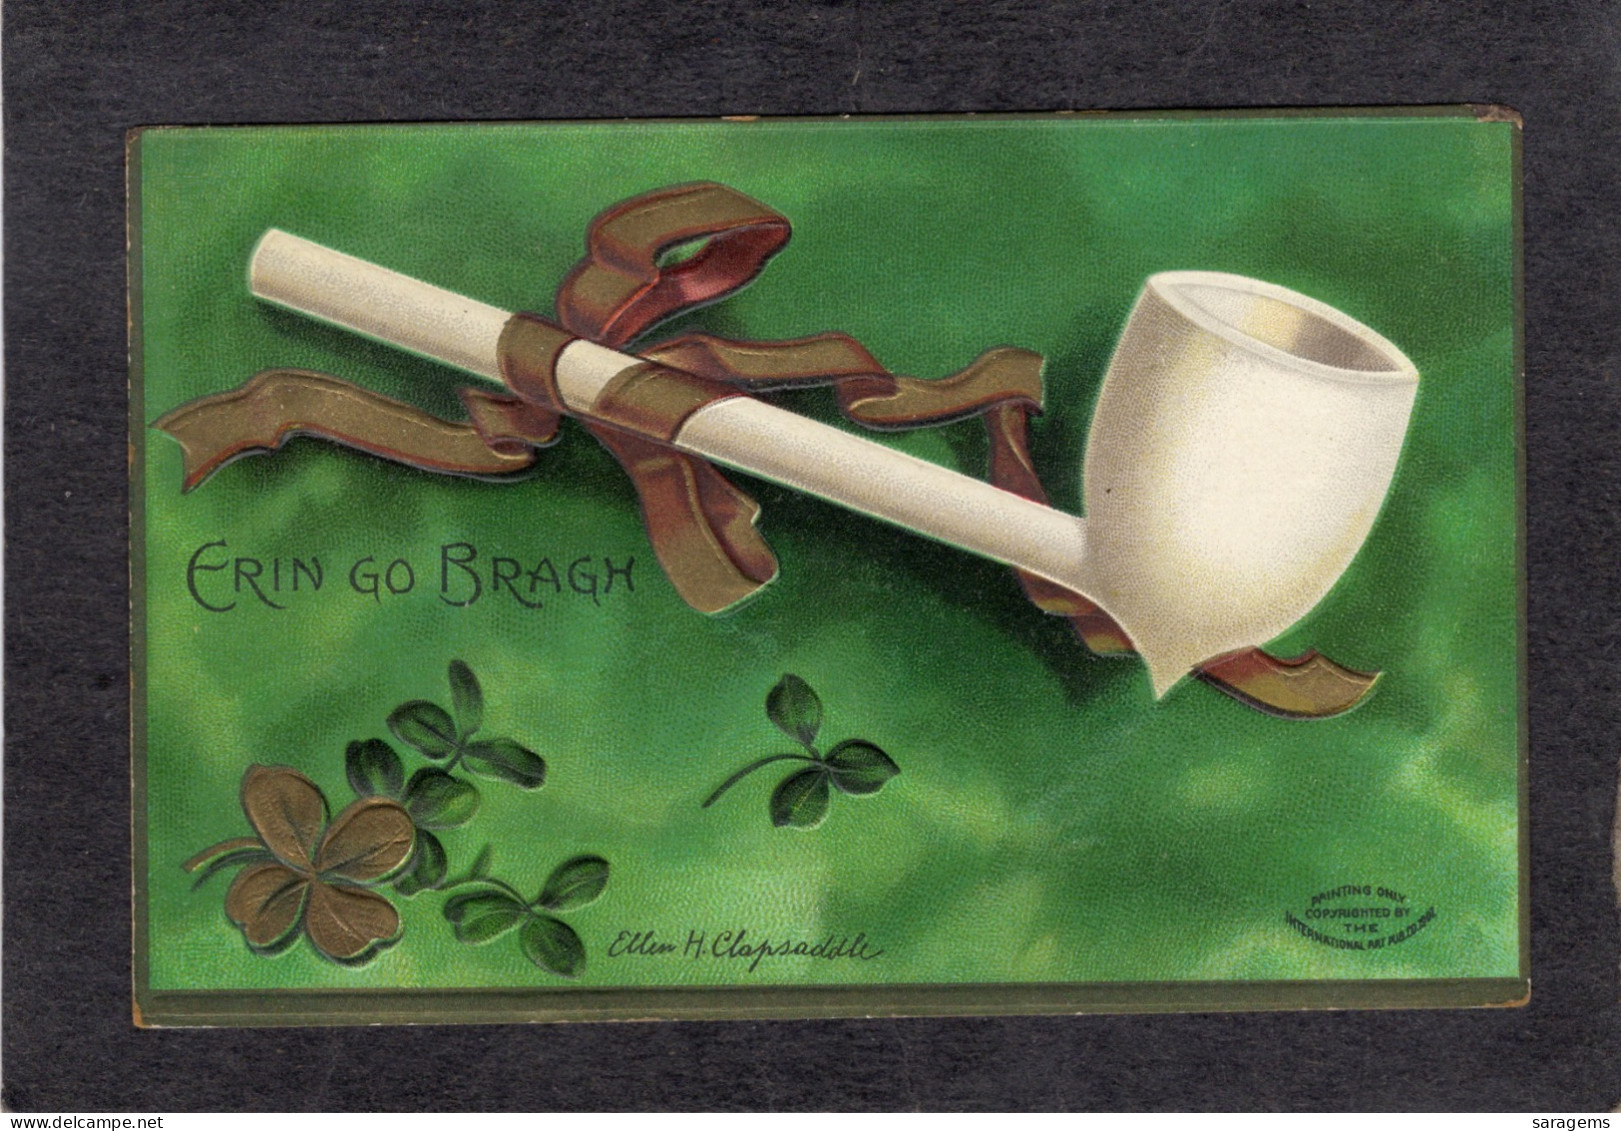 Ellen Clapsaddle(signed) - St. Patricks Day, Pipe In Ribbons 1908   - Antique Postcard - Clapsaddle